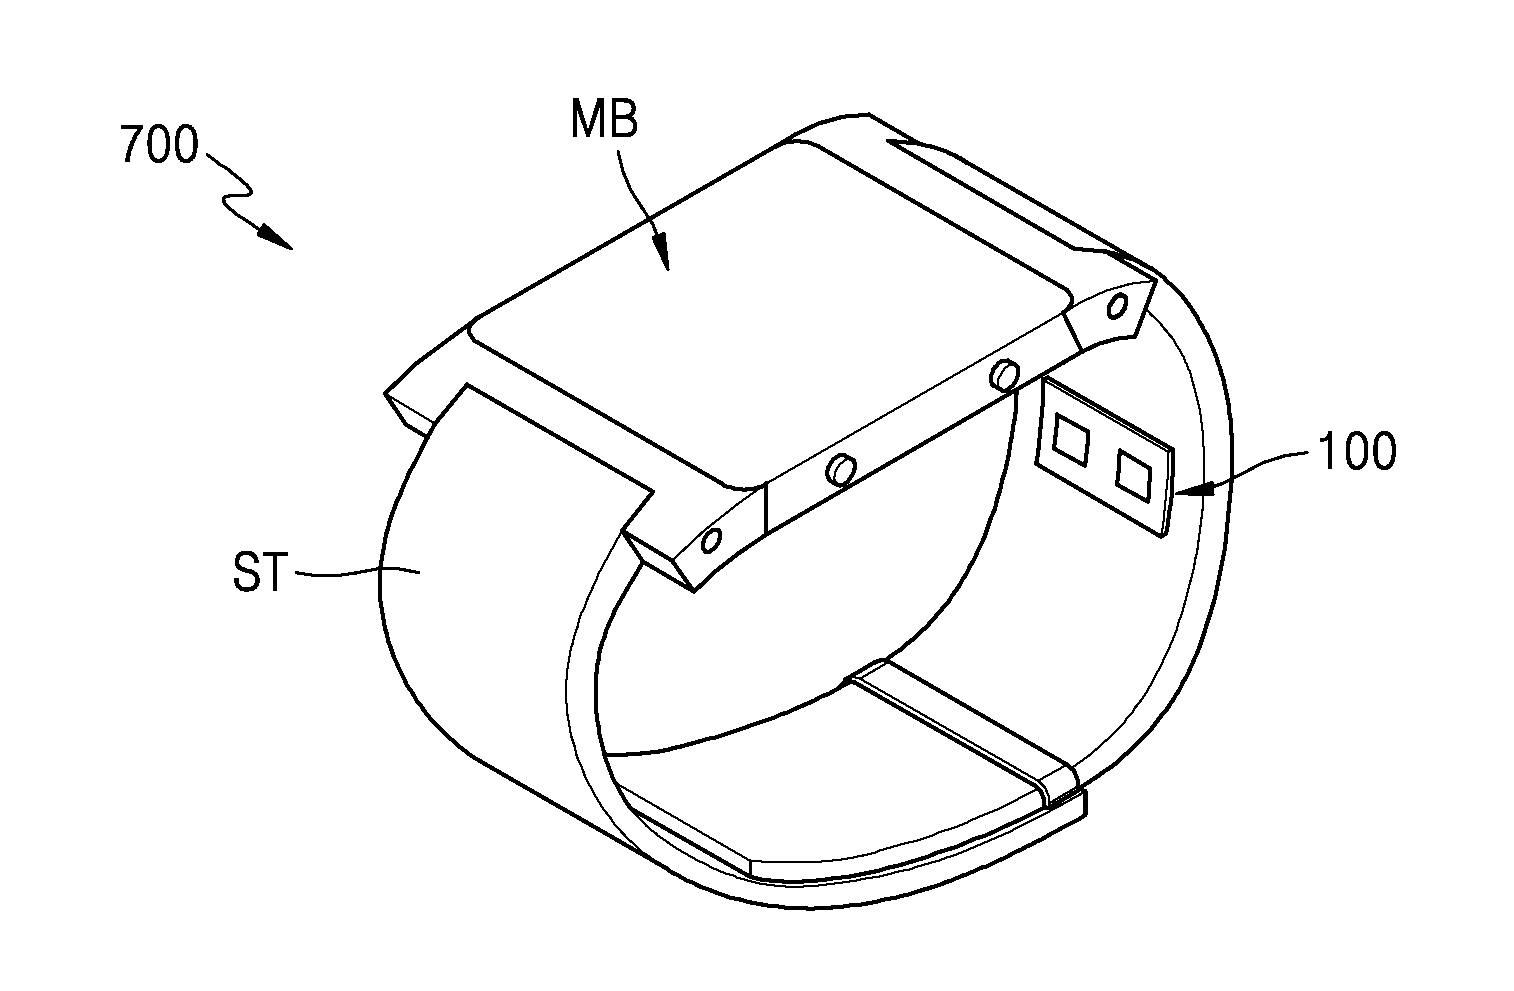 Apparatus for and method of measuring blood pressure